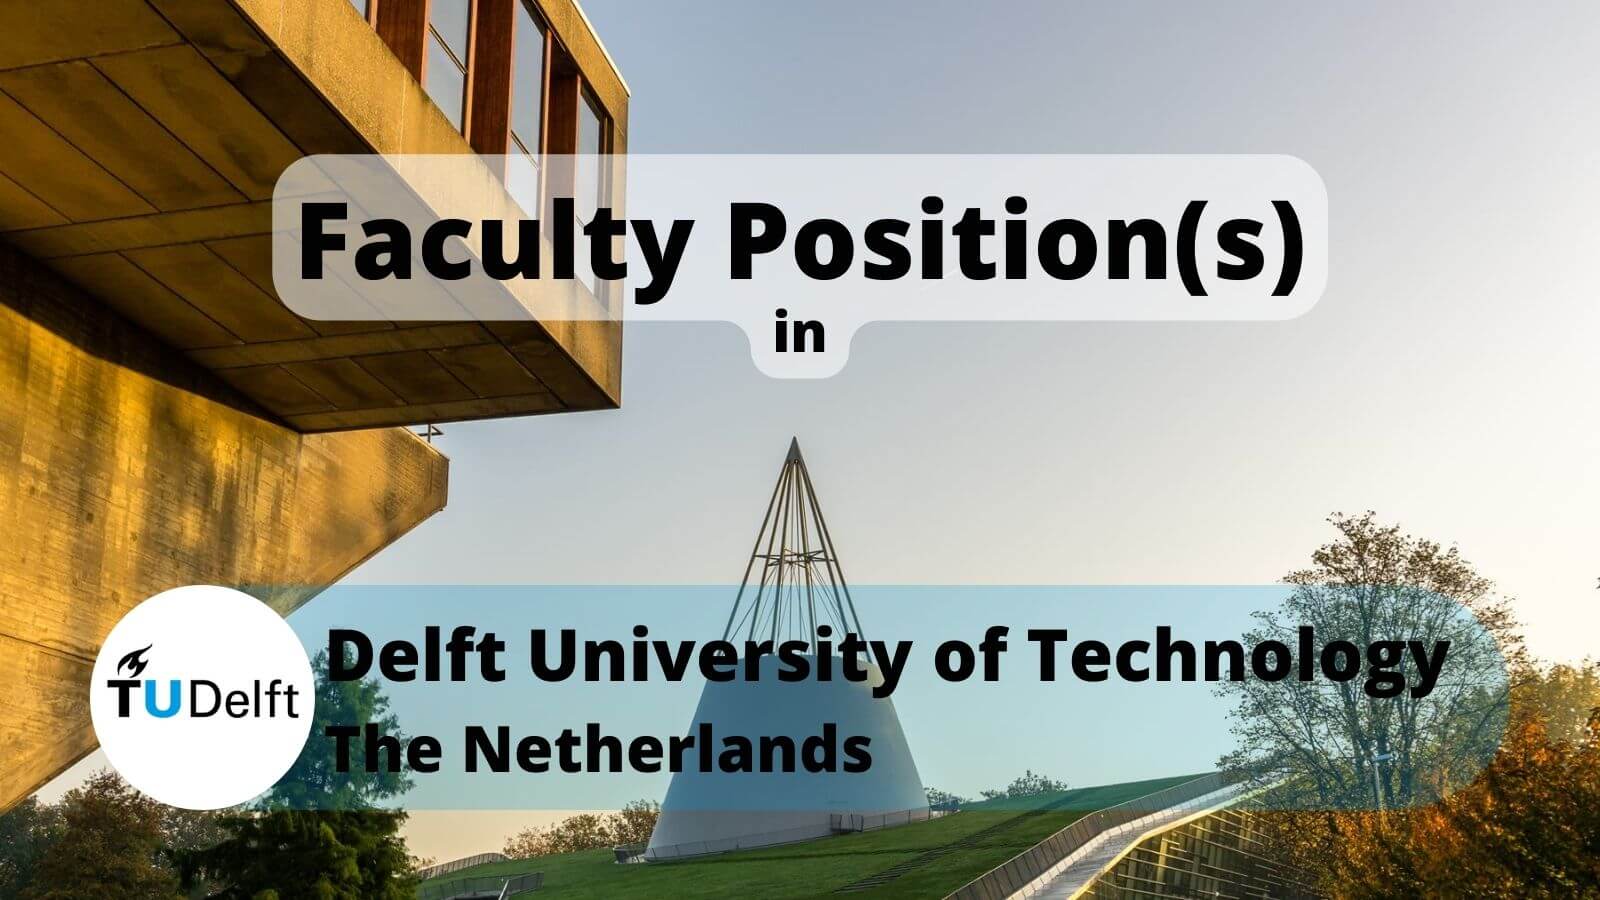 Faculty position at Delft University of Technology TUDelft, The Netherlands